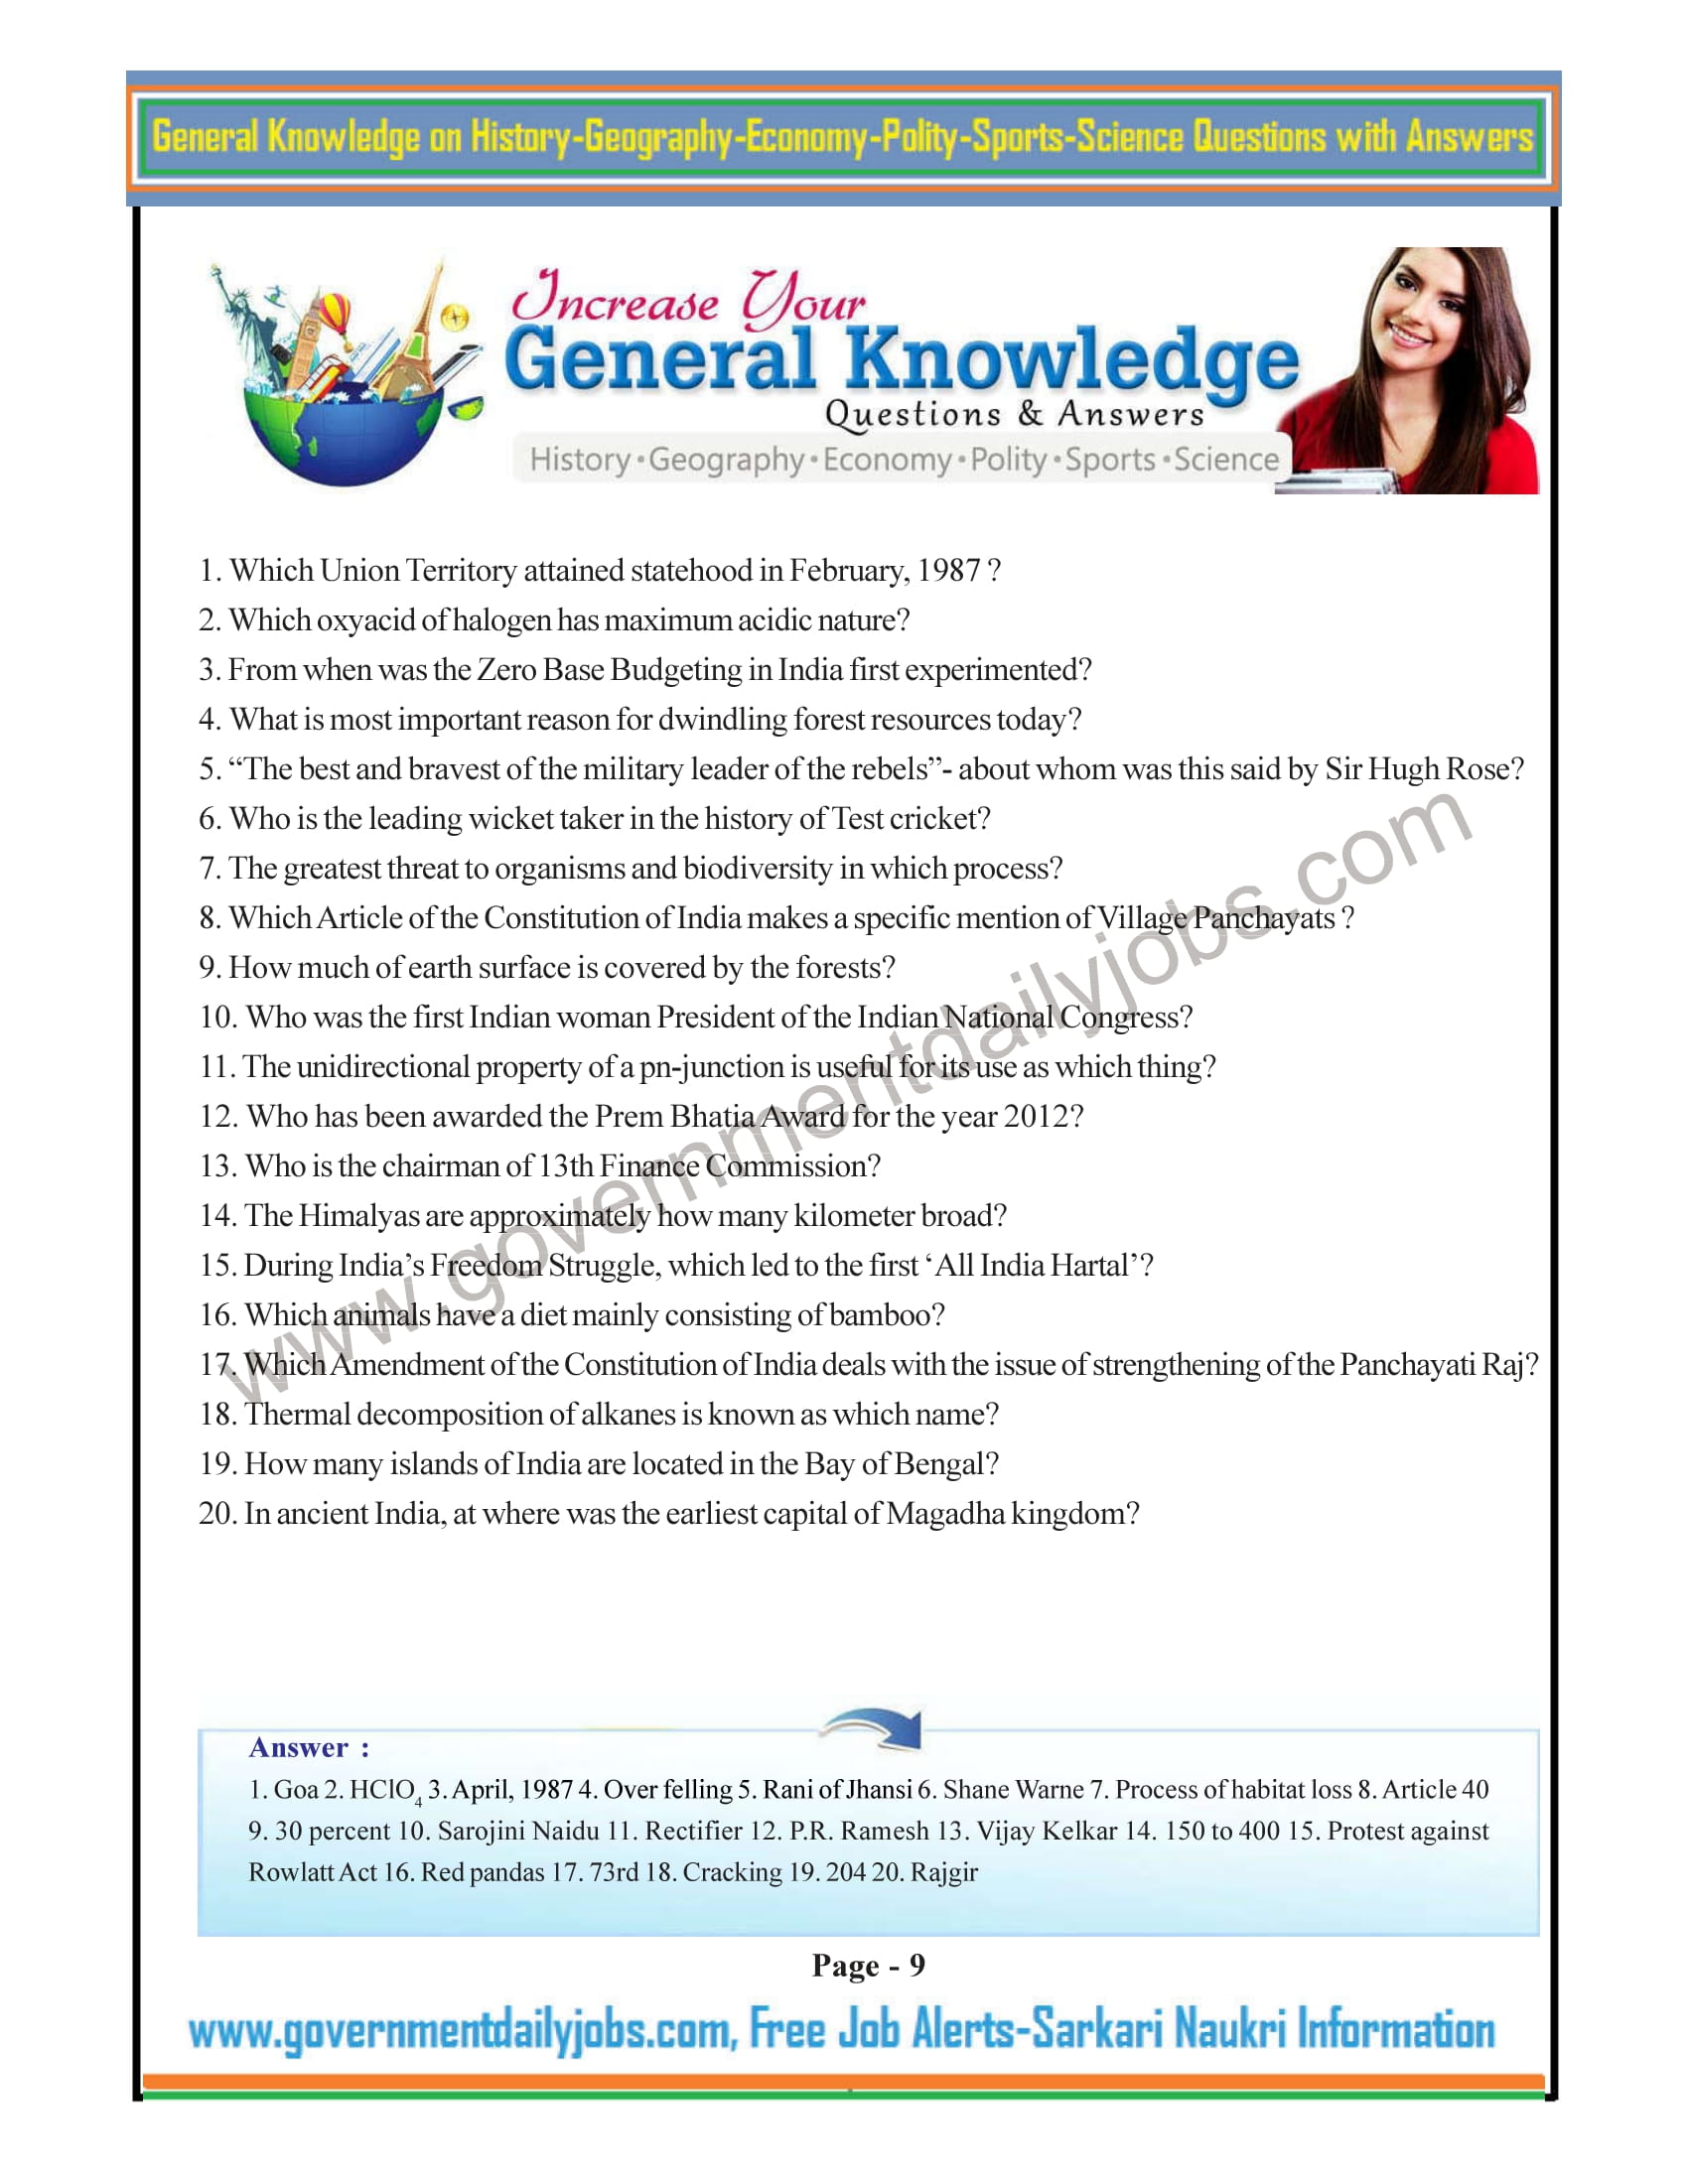 General Questions and Answers in English